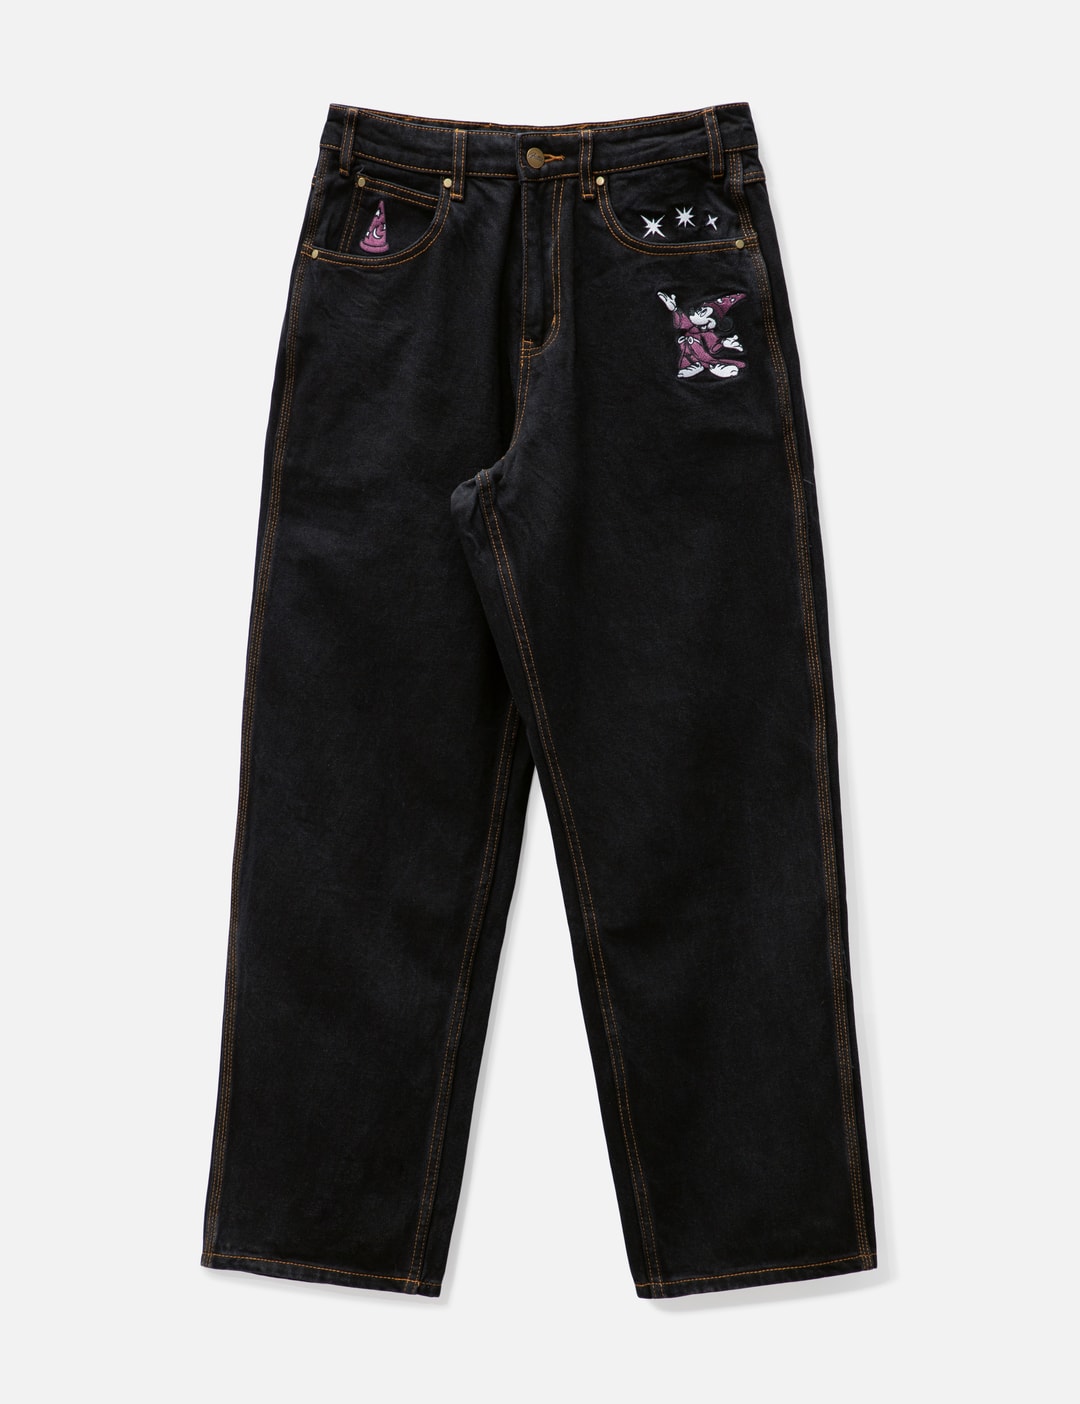 Butter Goods - Fantasia Baggy Denim Jeans | HBX - Globally Curated ...